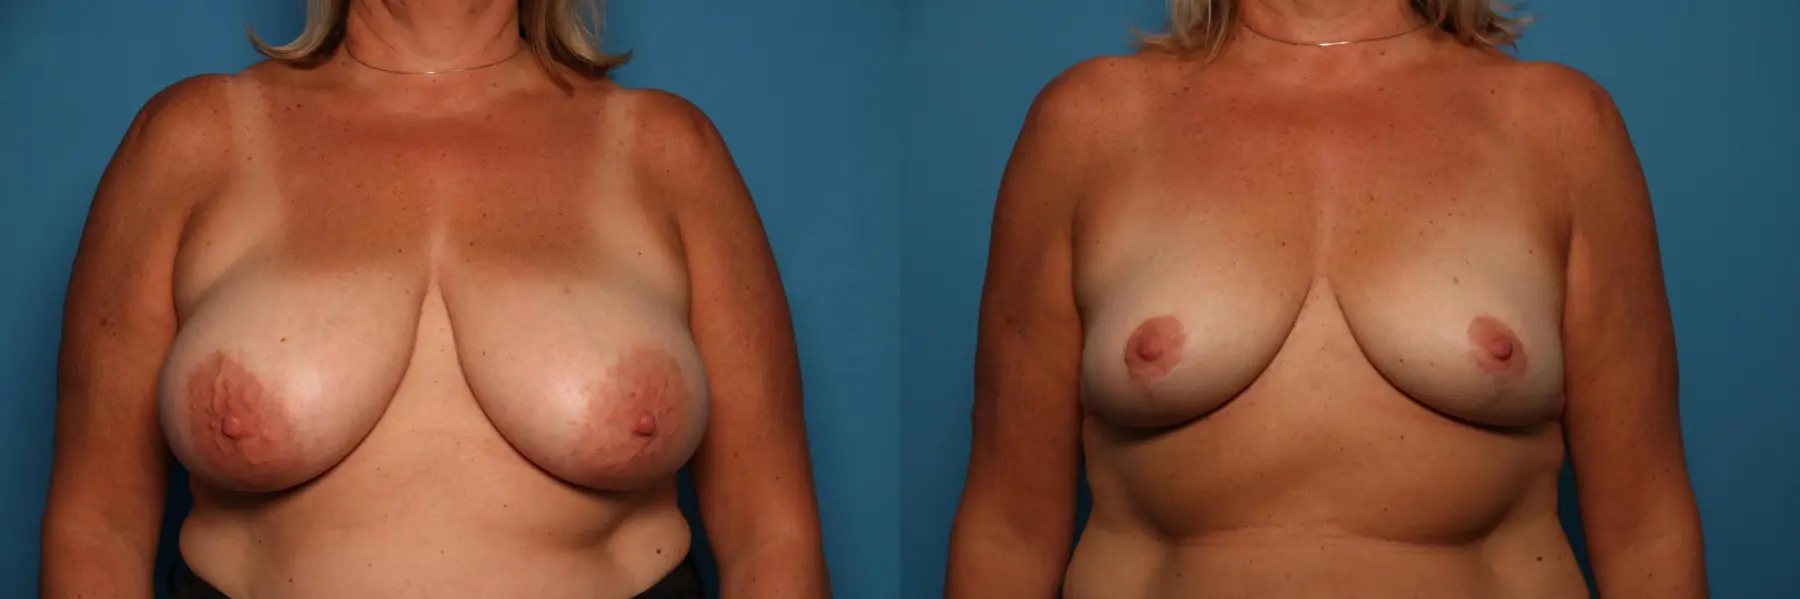 Breast Lift-Reduction: Patient 12 - Before and After  